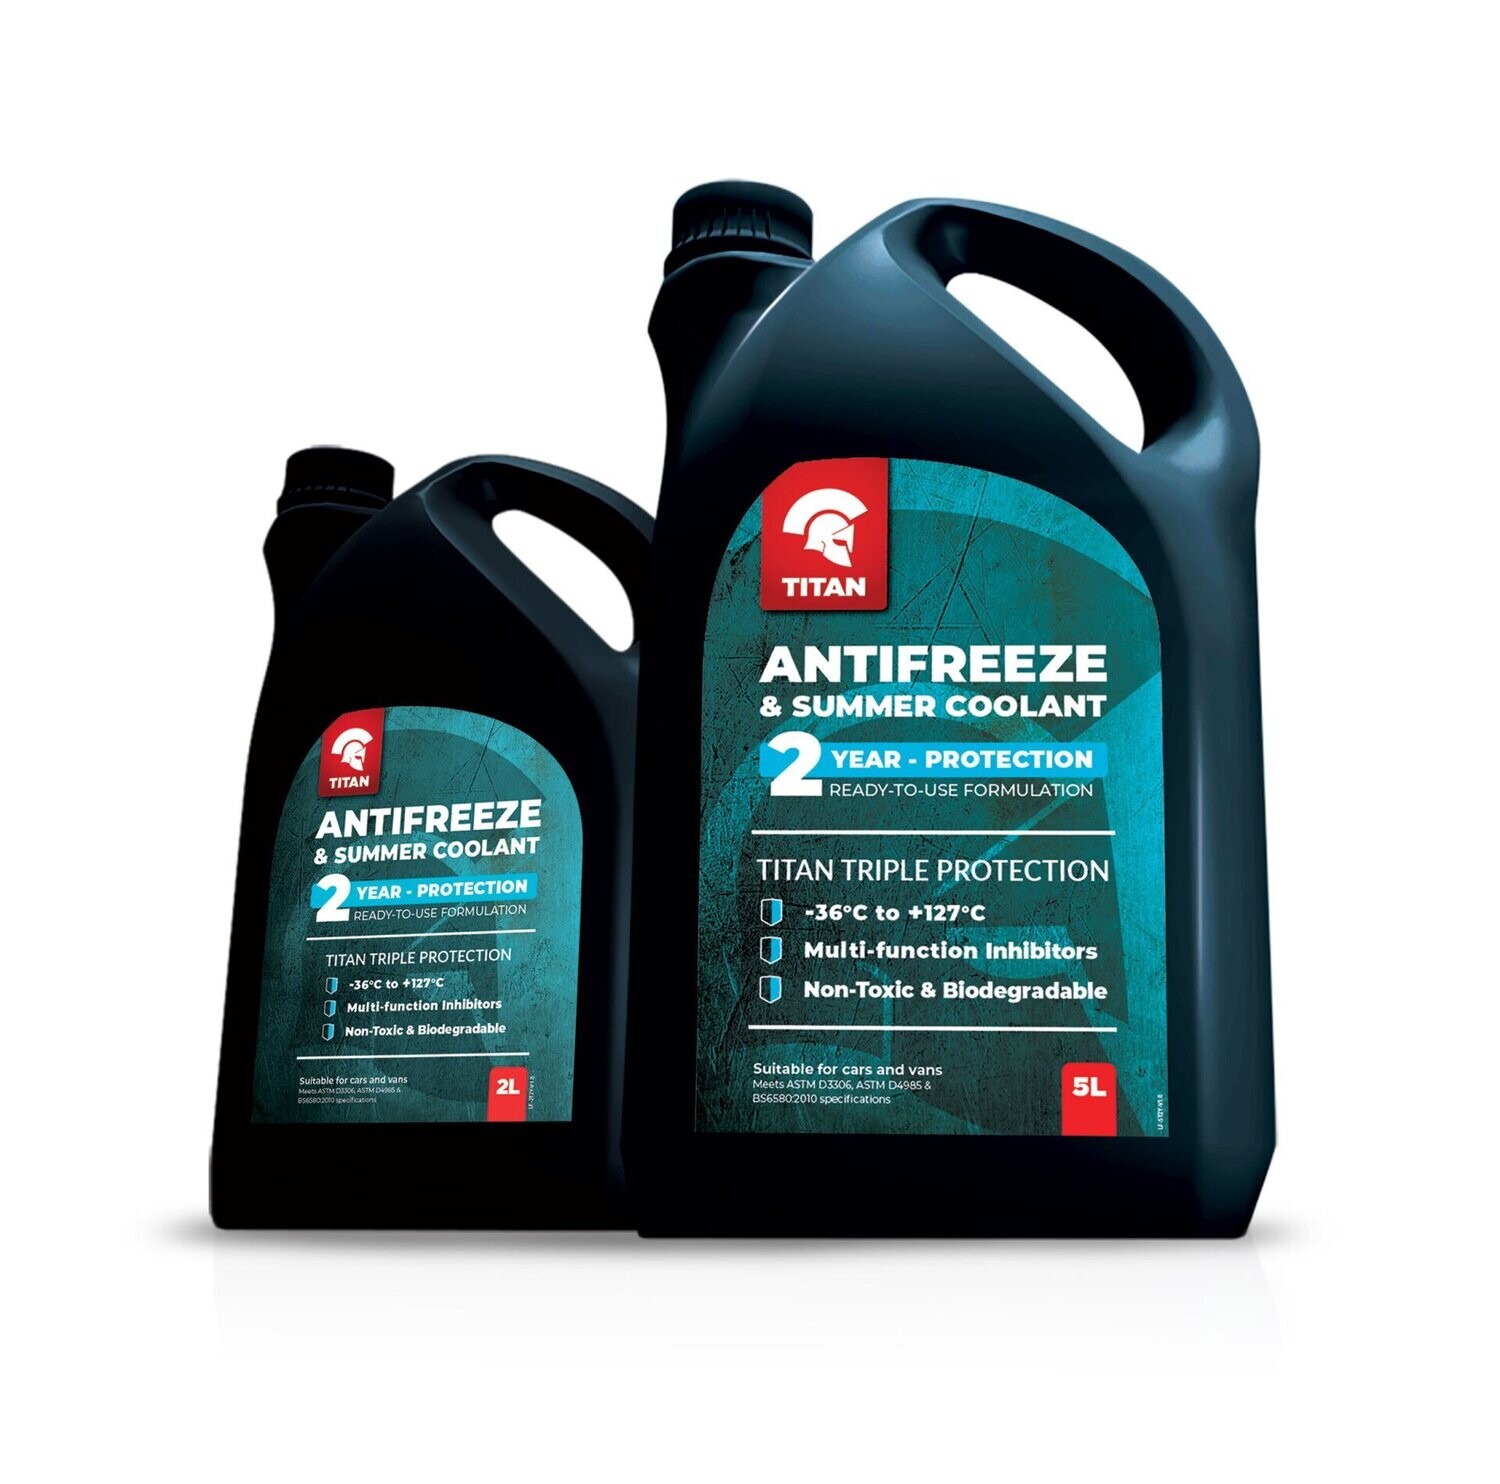 TITAN 2 YEAR ANTIFREEZE AND SUMMER COOLANT 50/50 PREMIX
READY TO USE 2 Litres